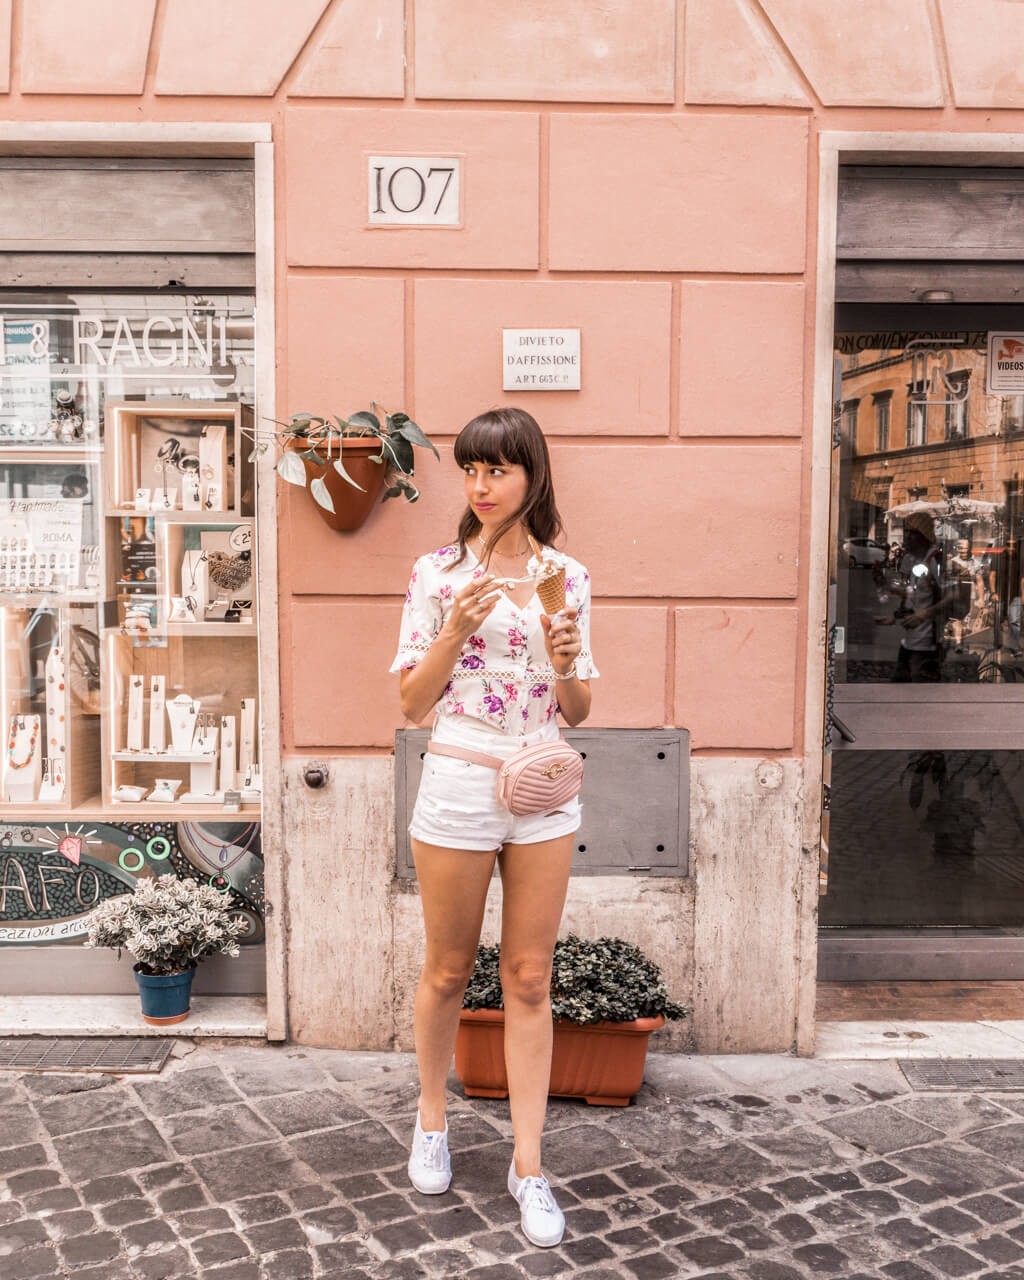 Instagram Outfits Round Up: Vacationing In Italy